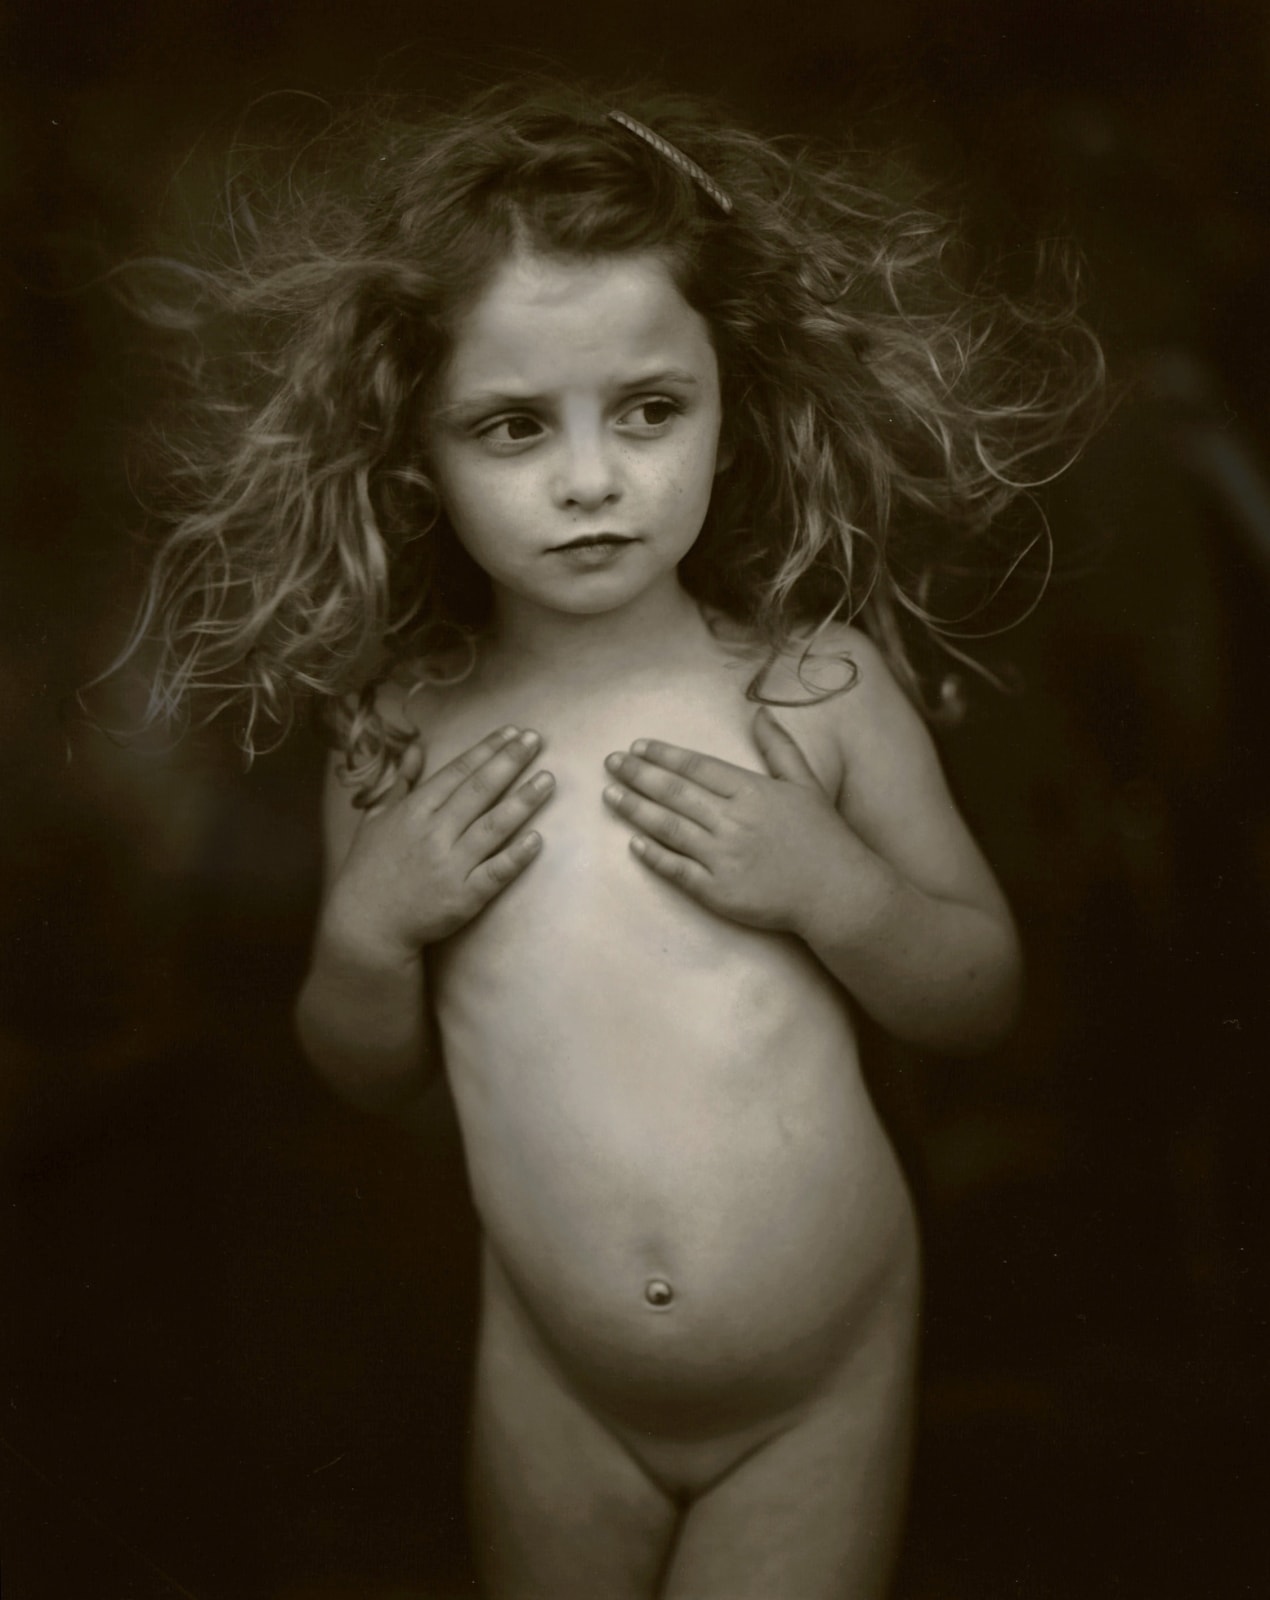 Sally Mann Immediate Family series, Modest Child, photograph of Virginia holding her hands over her chest